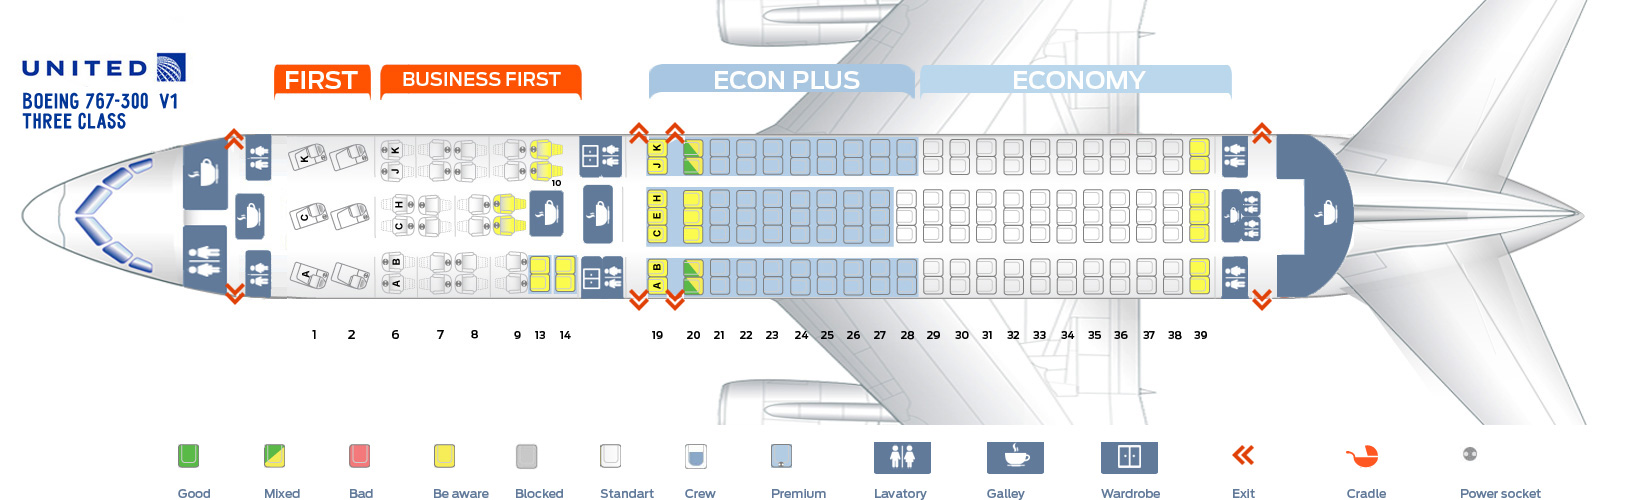 Seat_map_United_Airlines_Boeing_767_300_v1